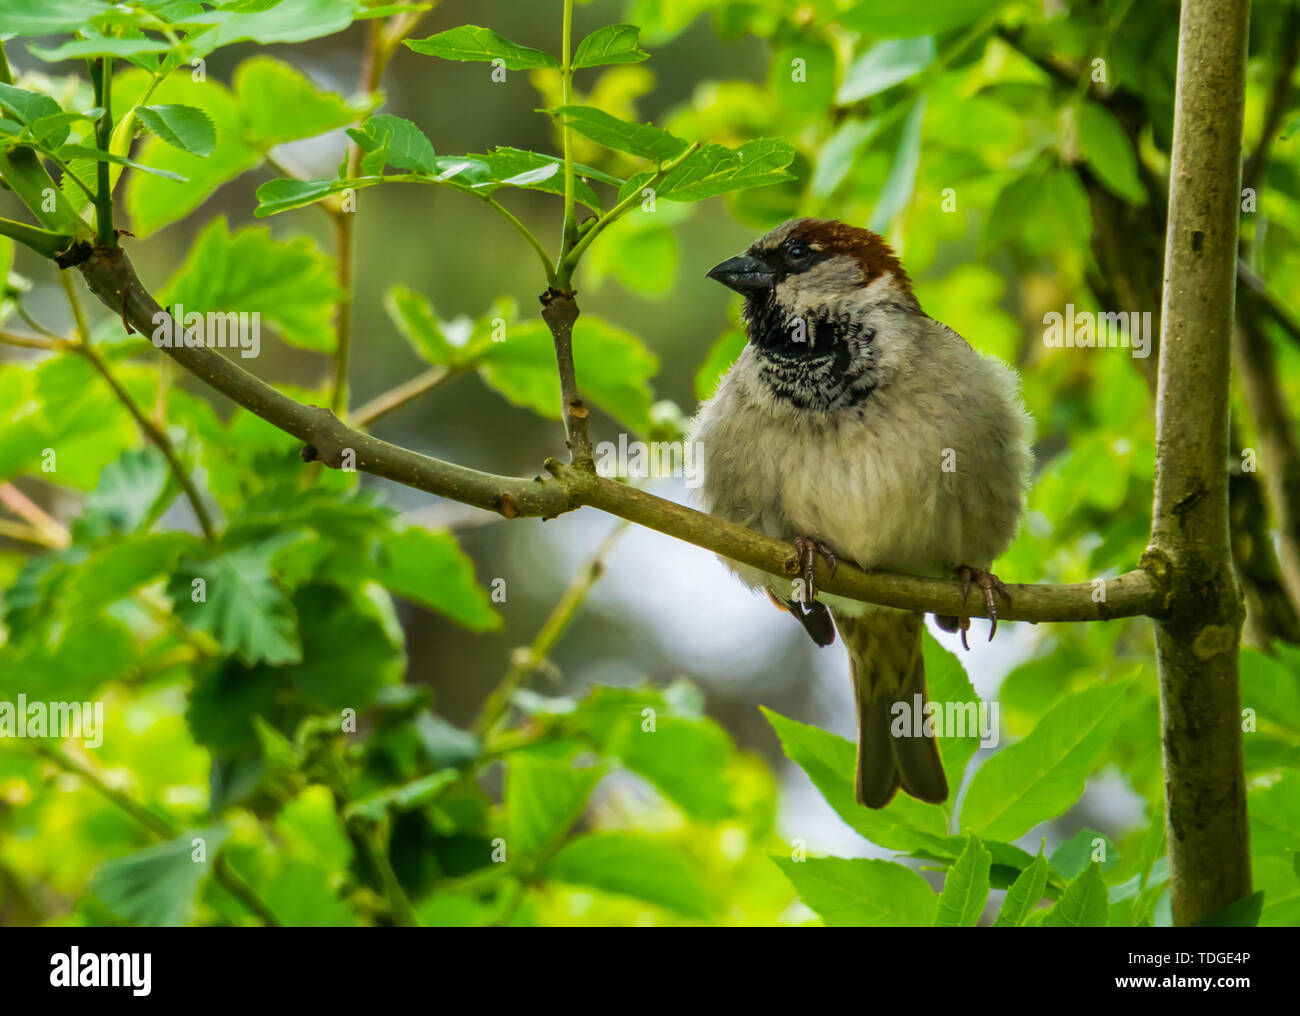 closeup portrait of a house sparrow sitting on a tree branch, common bird specie from Eurasia, nature background Stock Photo